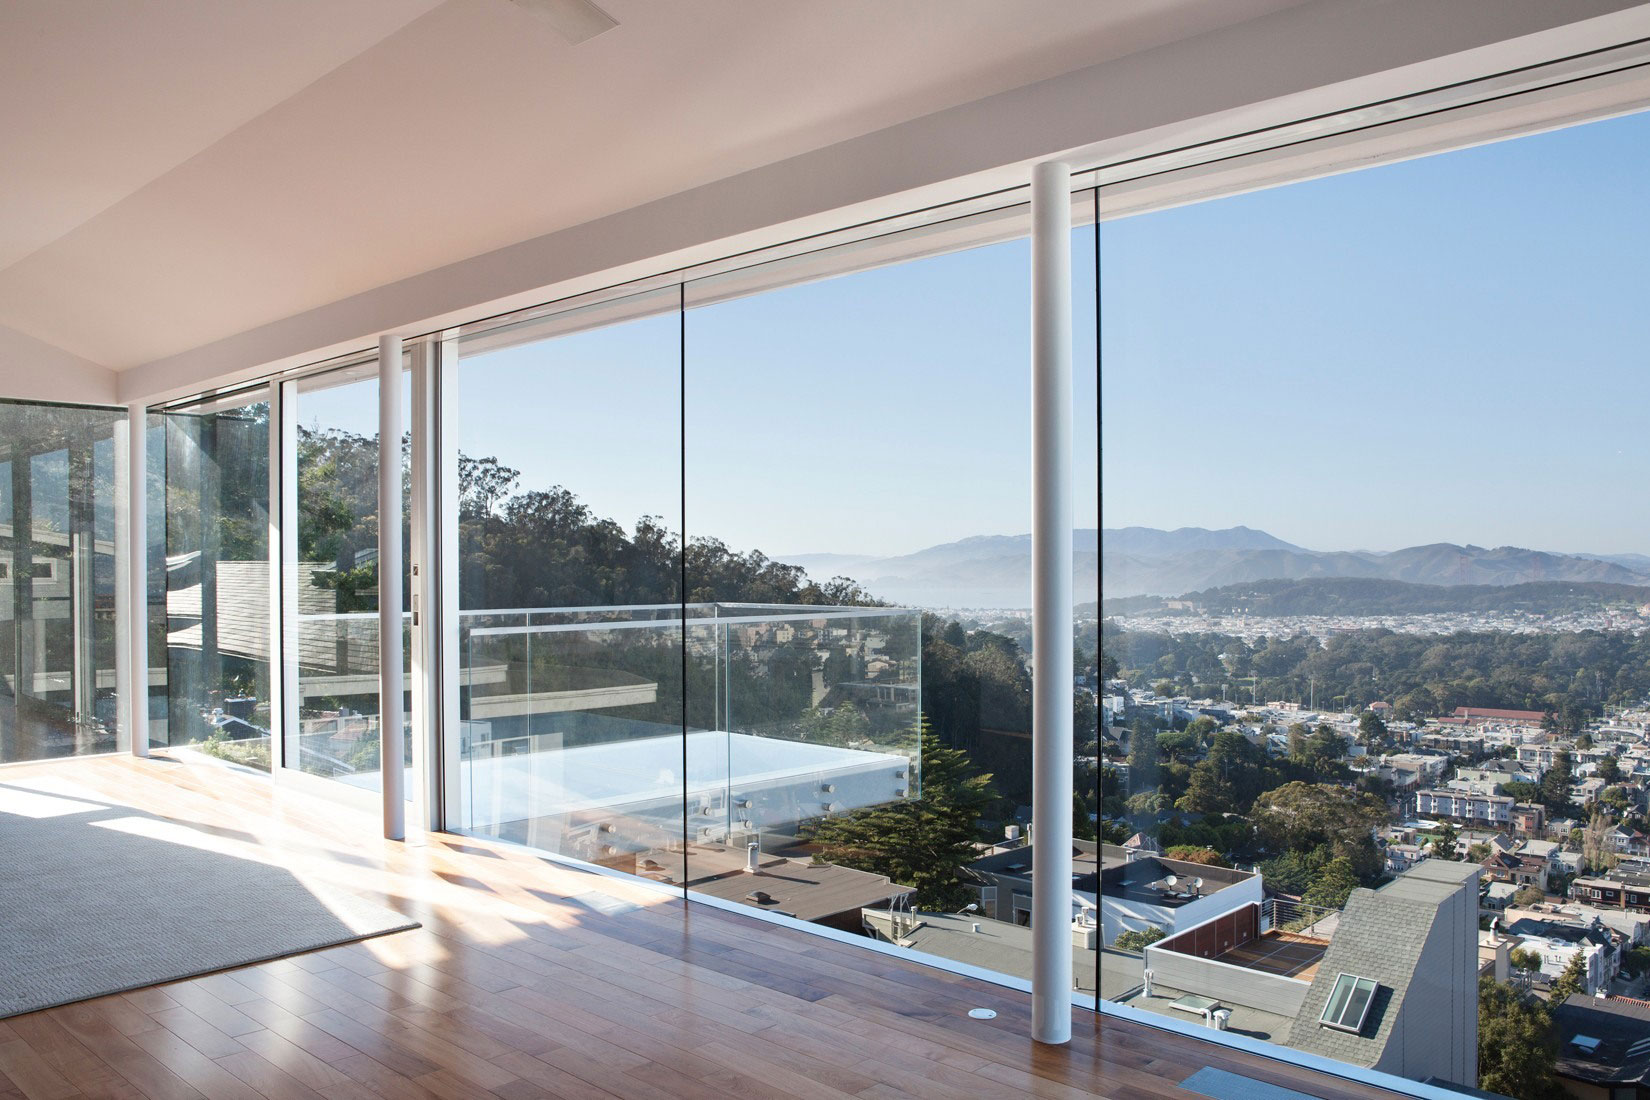 A Stylish Hillside Home Features Cantilevered Deck with Glass Floor in San Francisco by Jensen Architects (6)